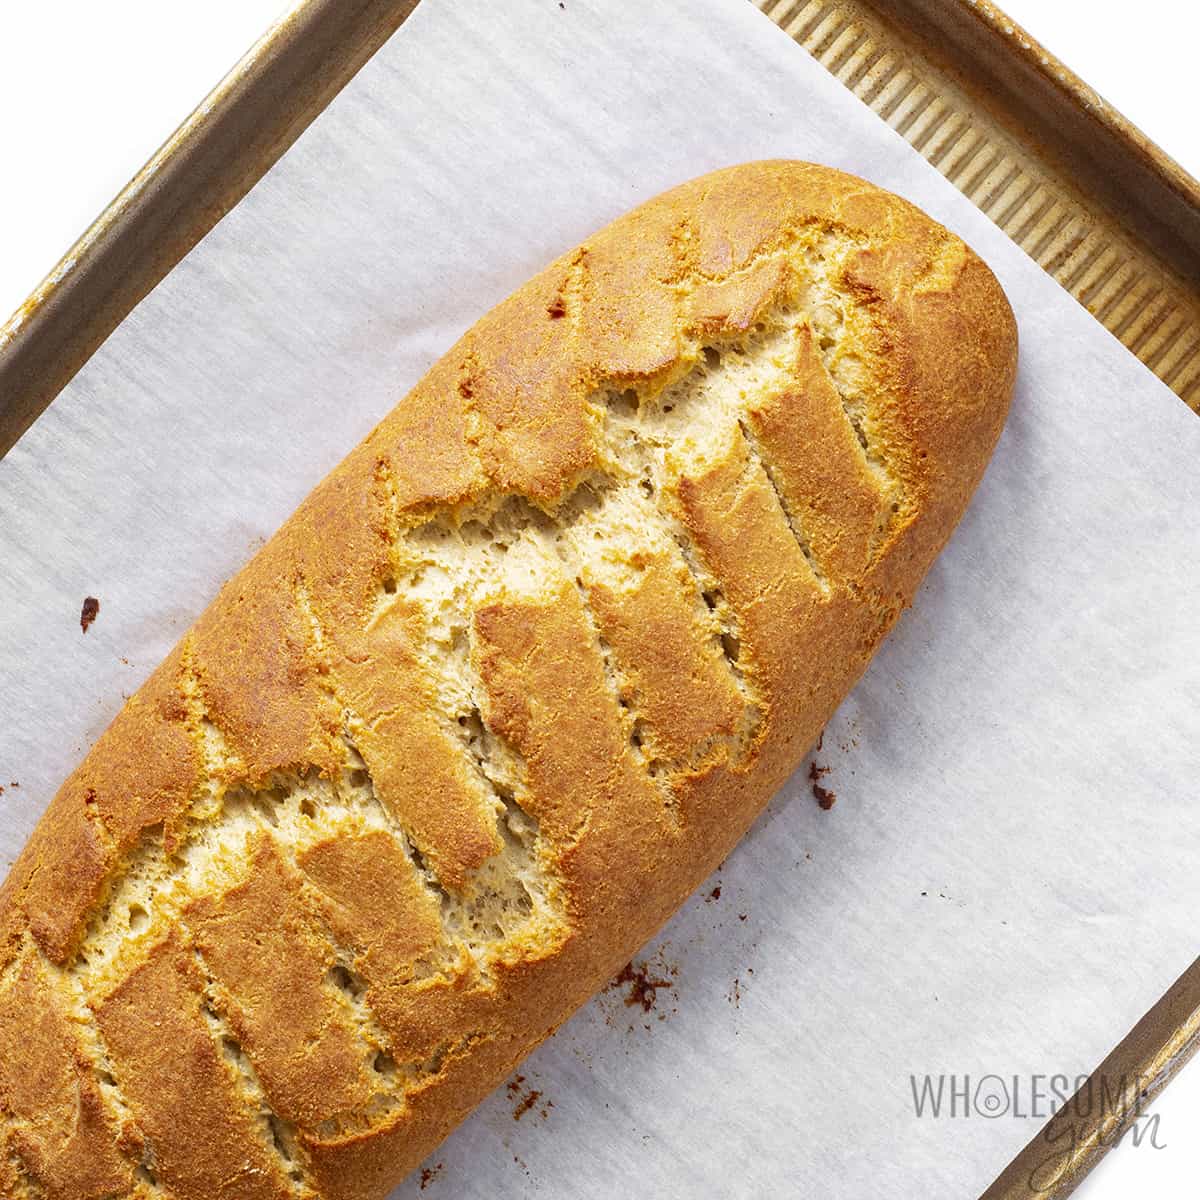 Baked bread loaf on a baking pan.